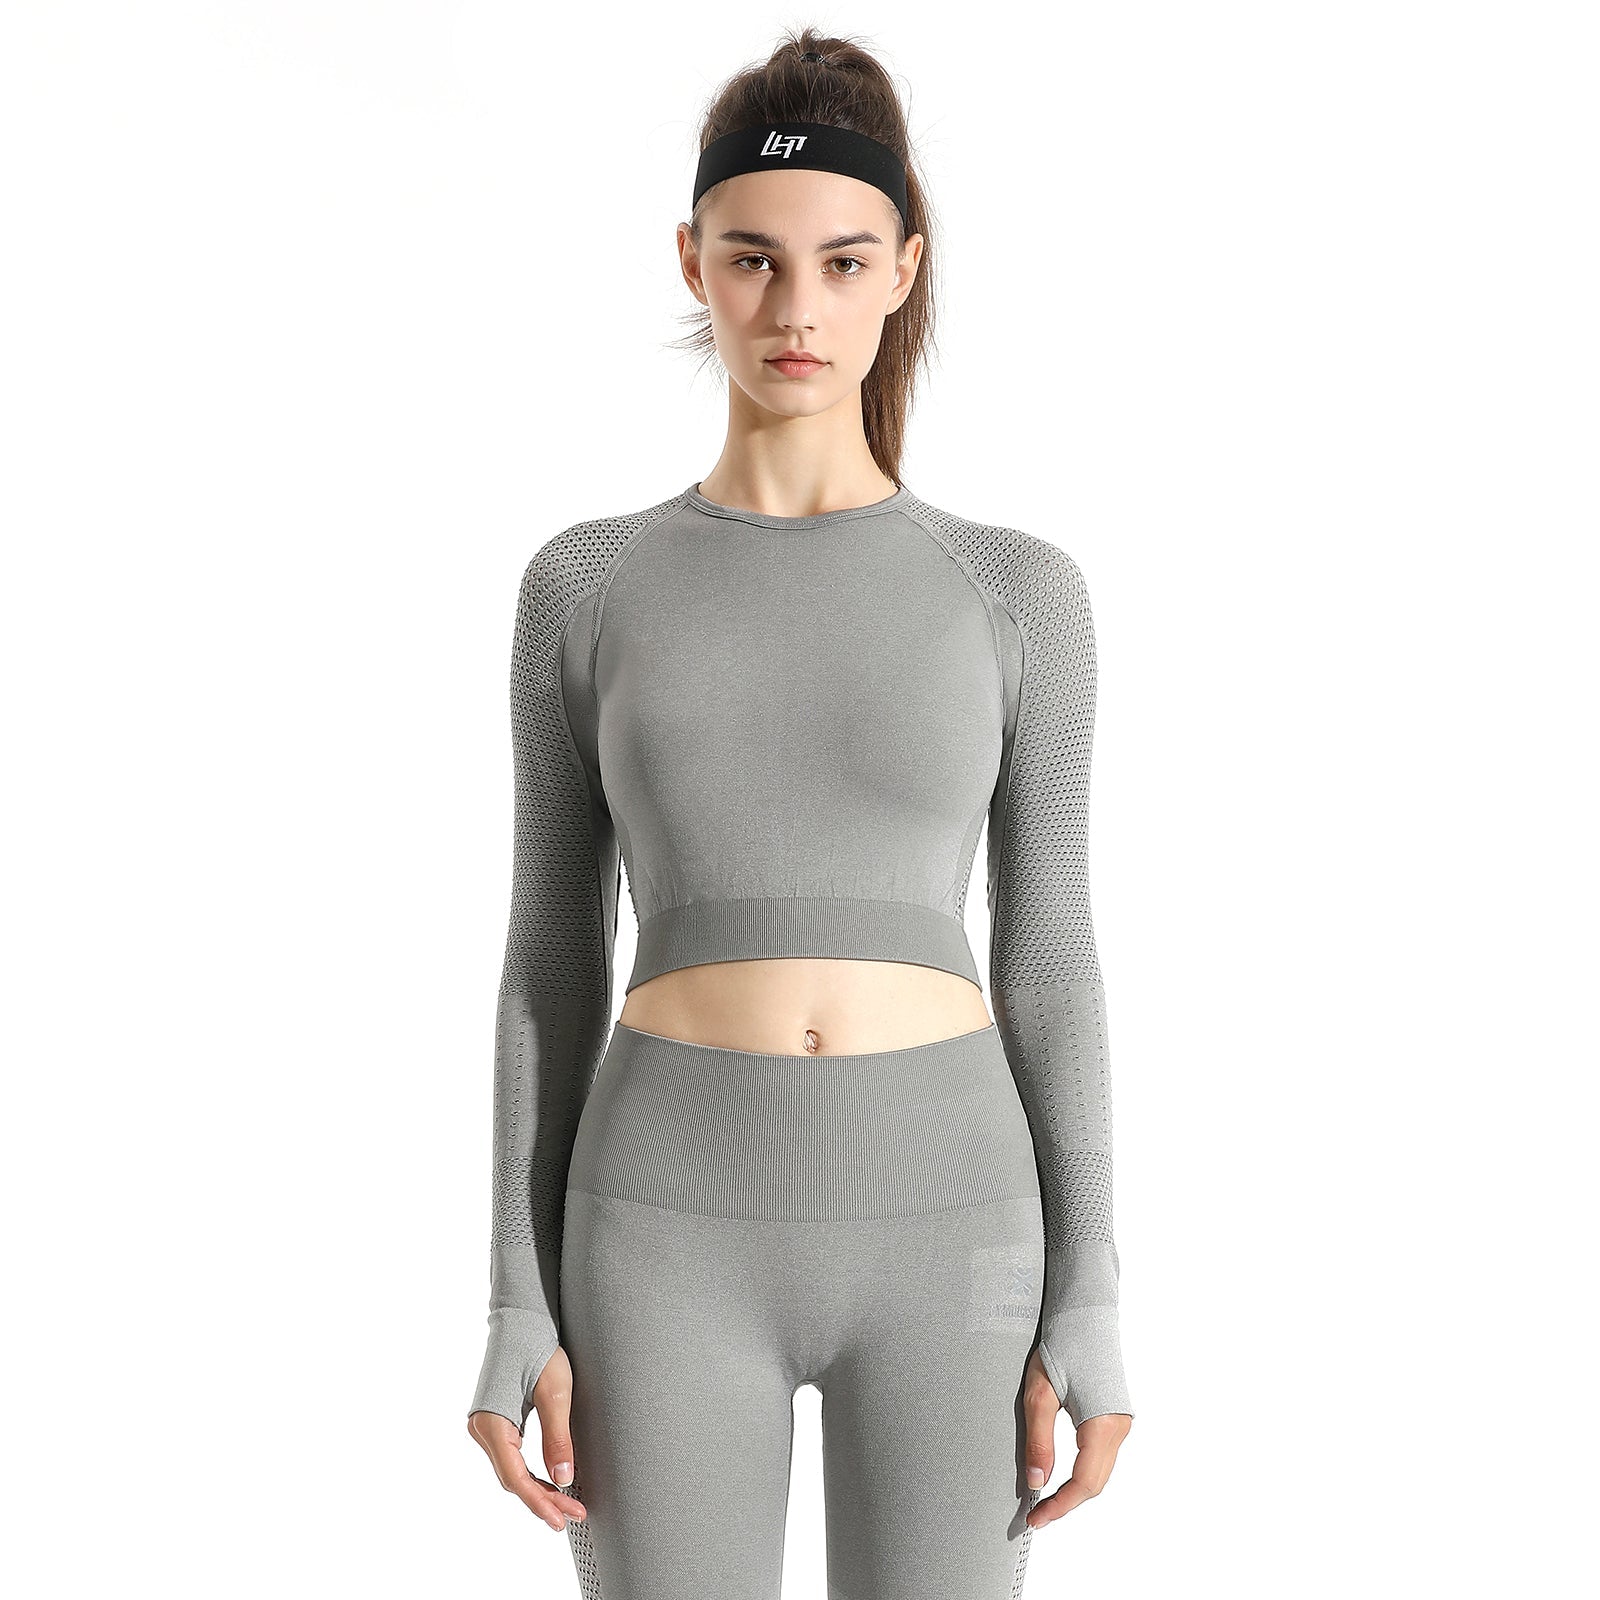 Workout Outfit  Lululemon outfits, Sporty outfits, Trendy outfits